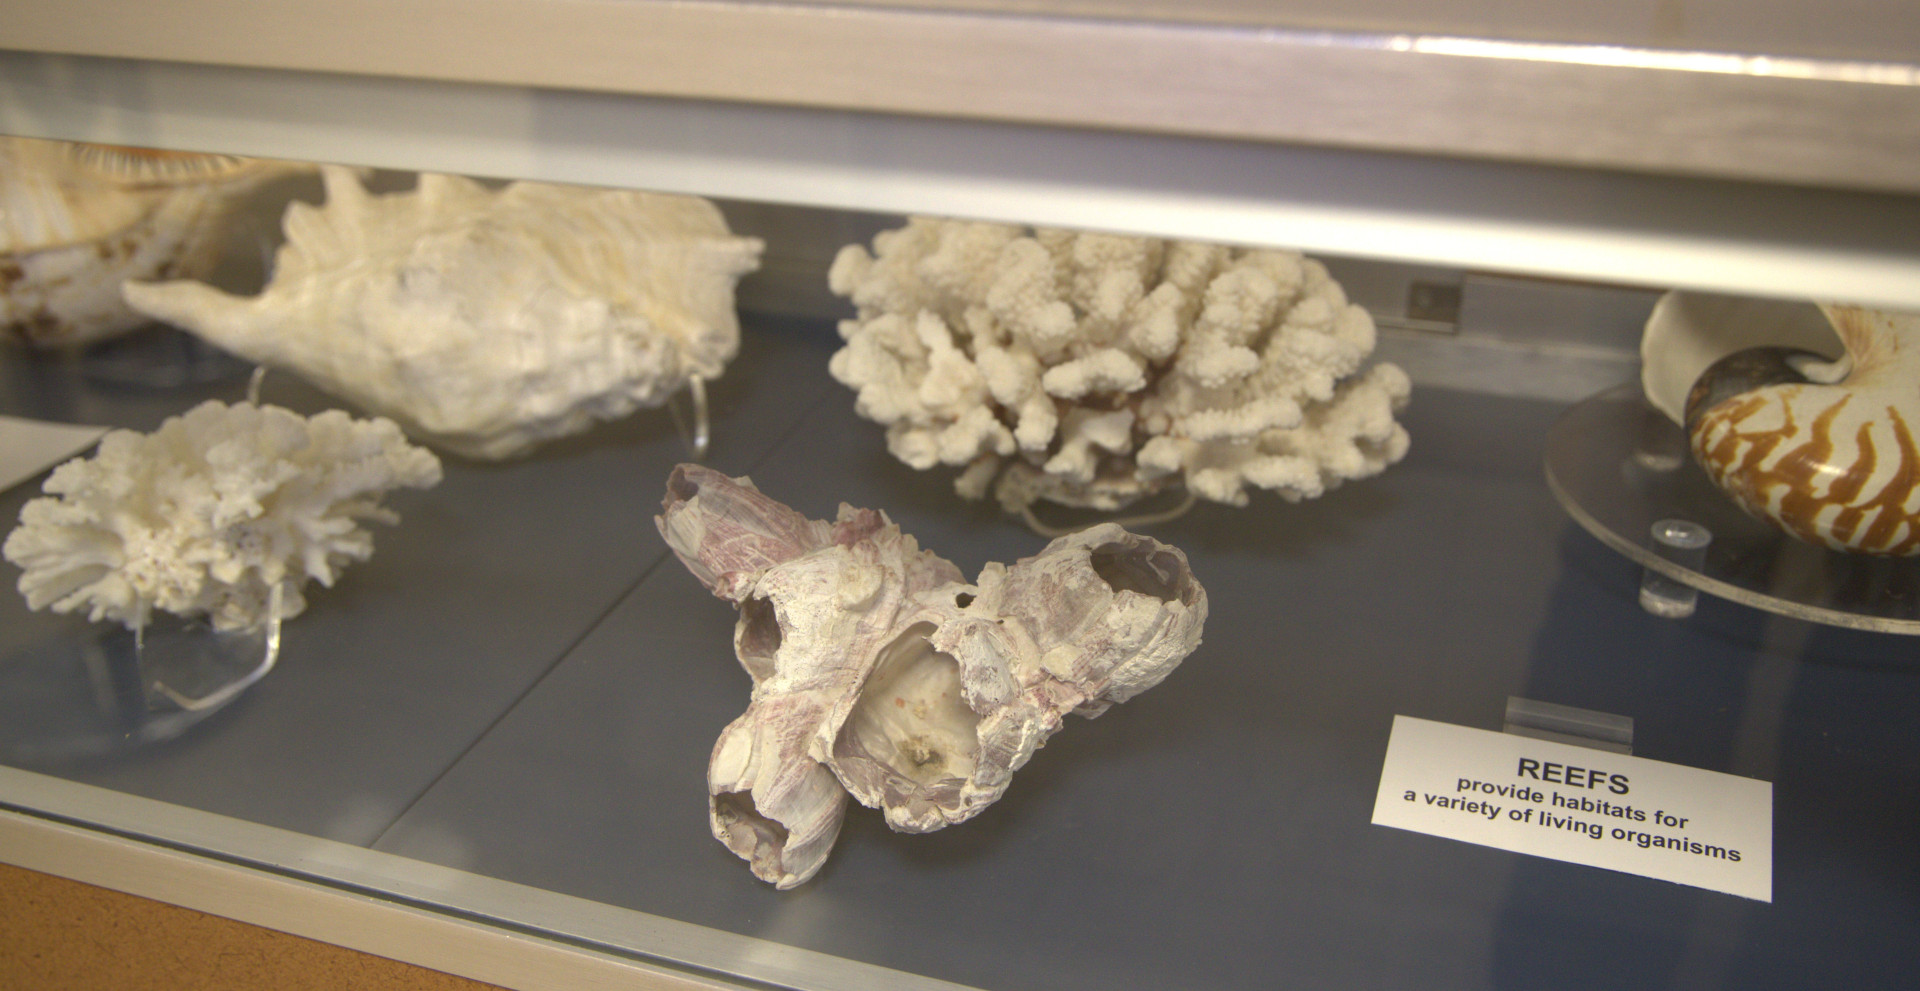 Coral specimens on display at the Orton Geological Museum